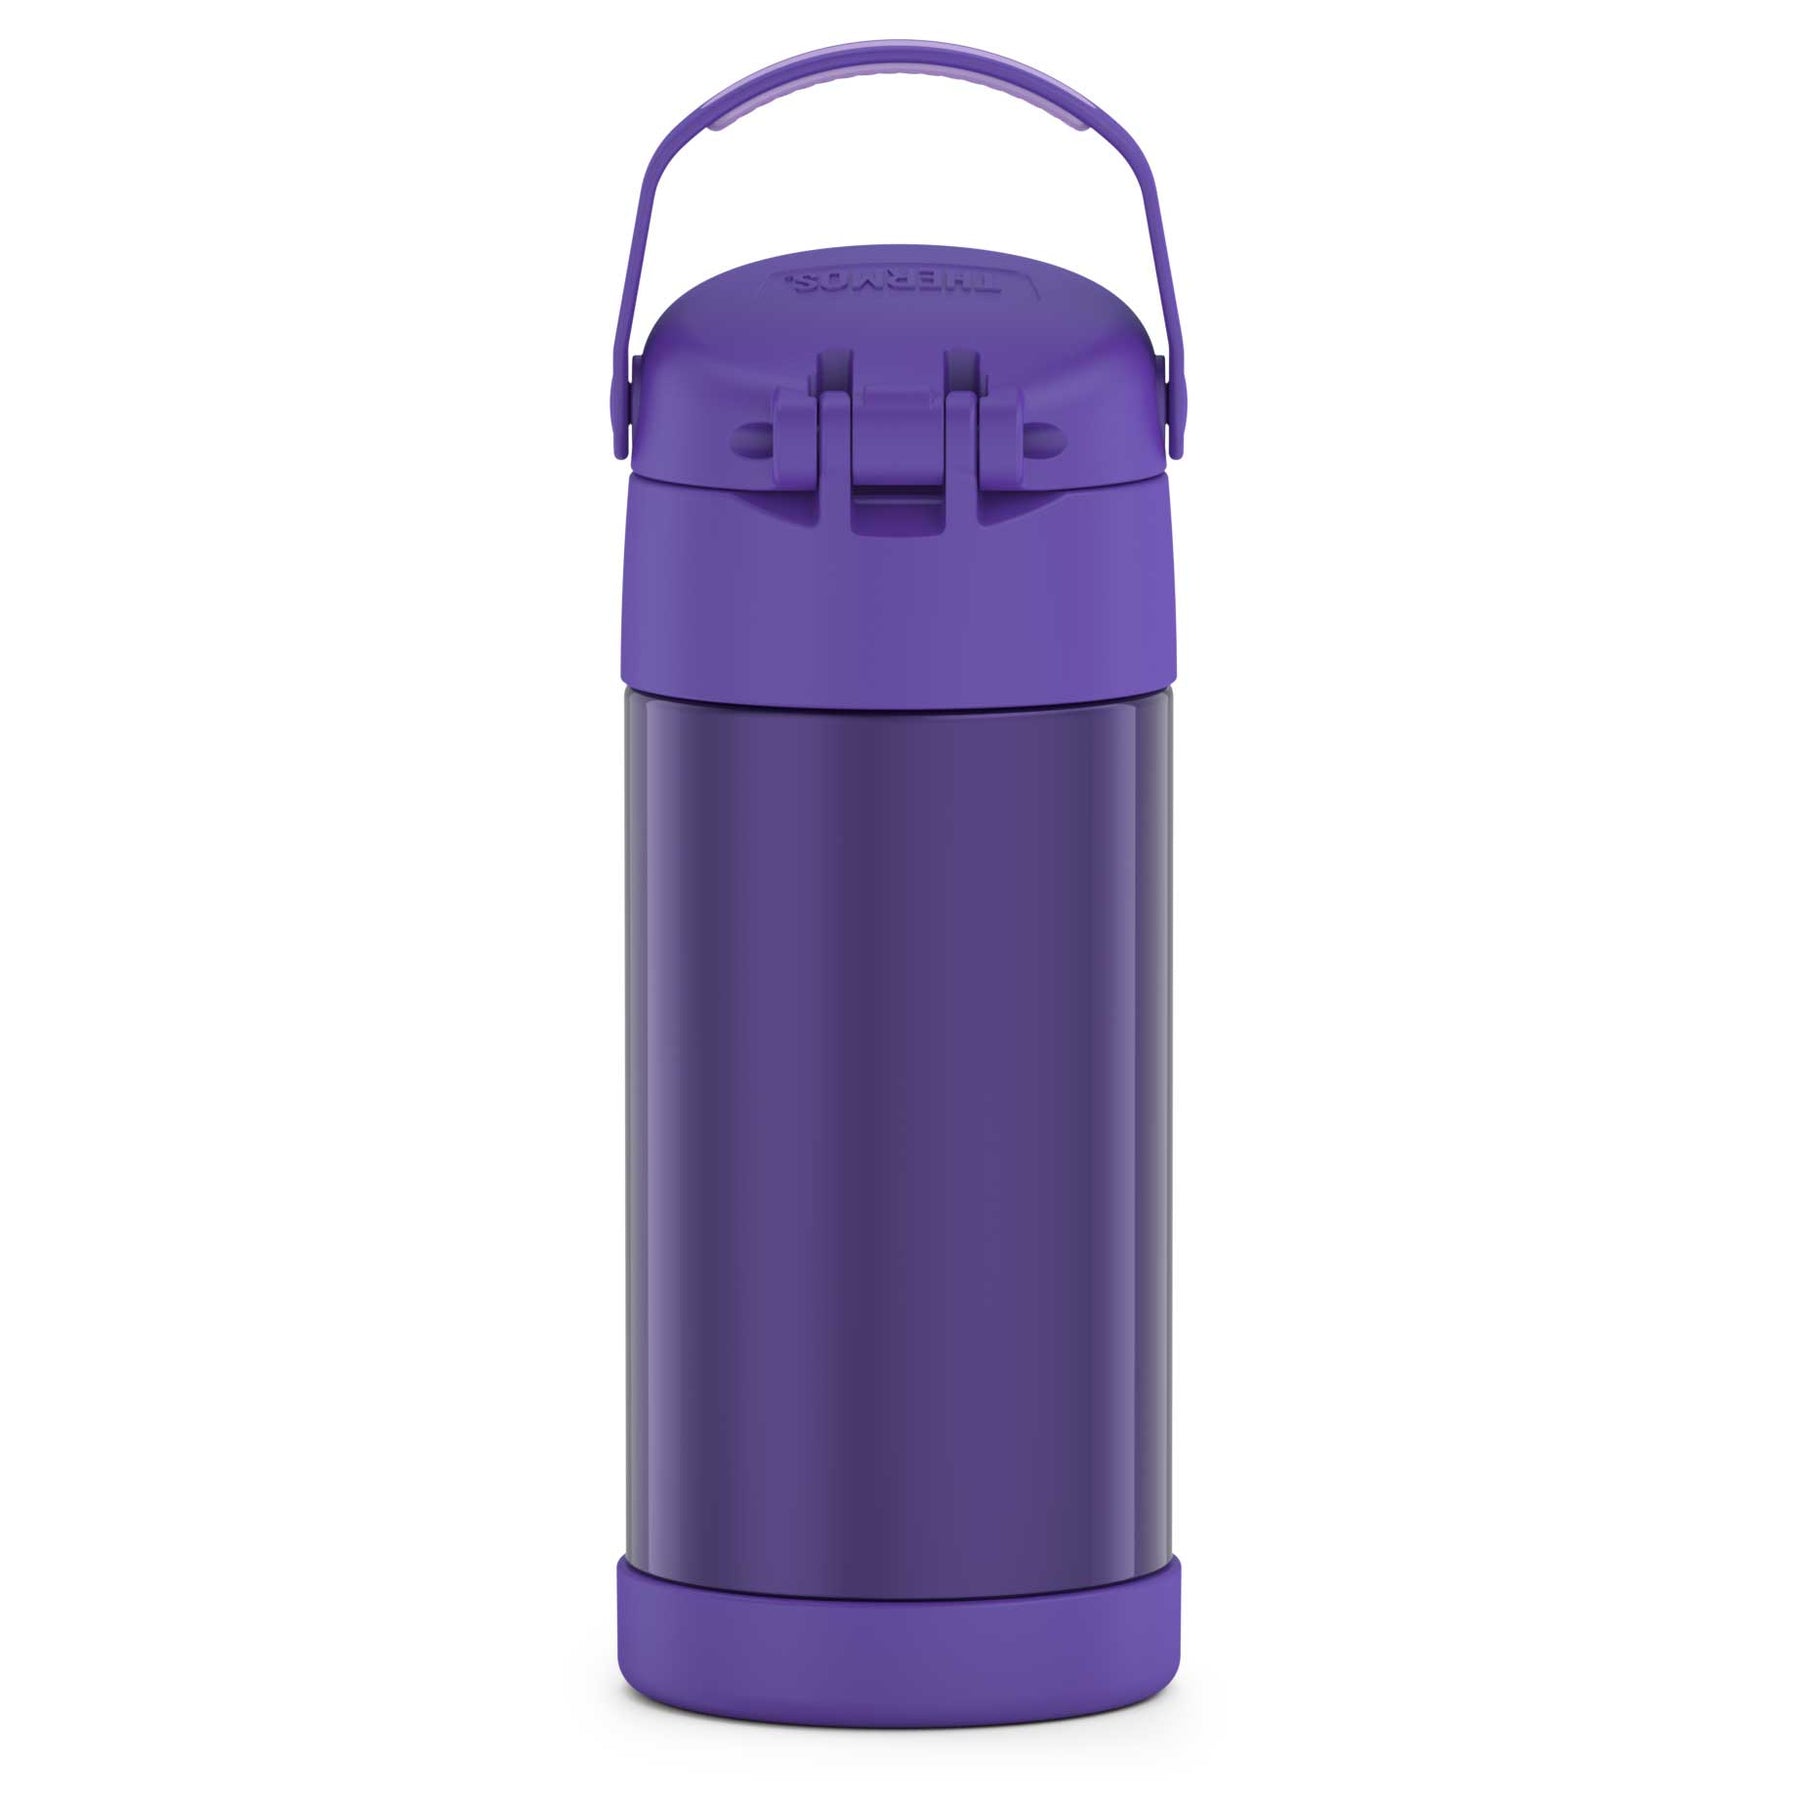 Thermos 12 oz. Stainless Steel Non-Licensed FUNtainer Bottle Purple/Pink 